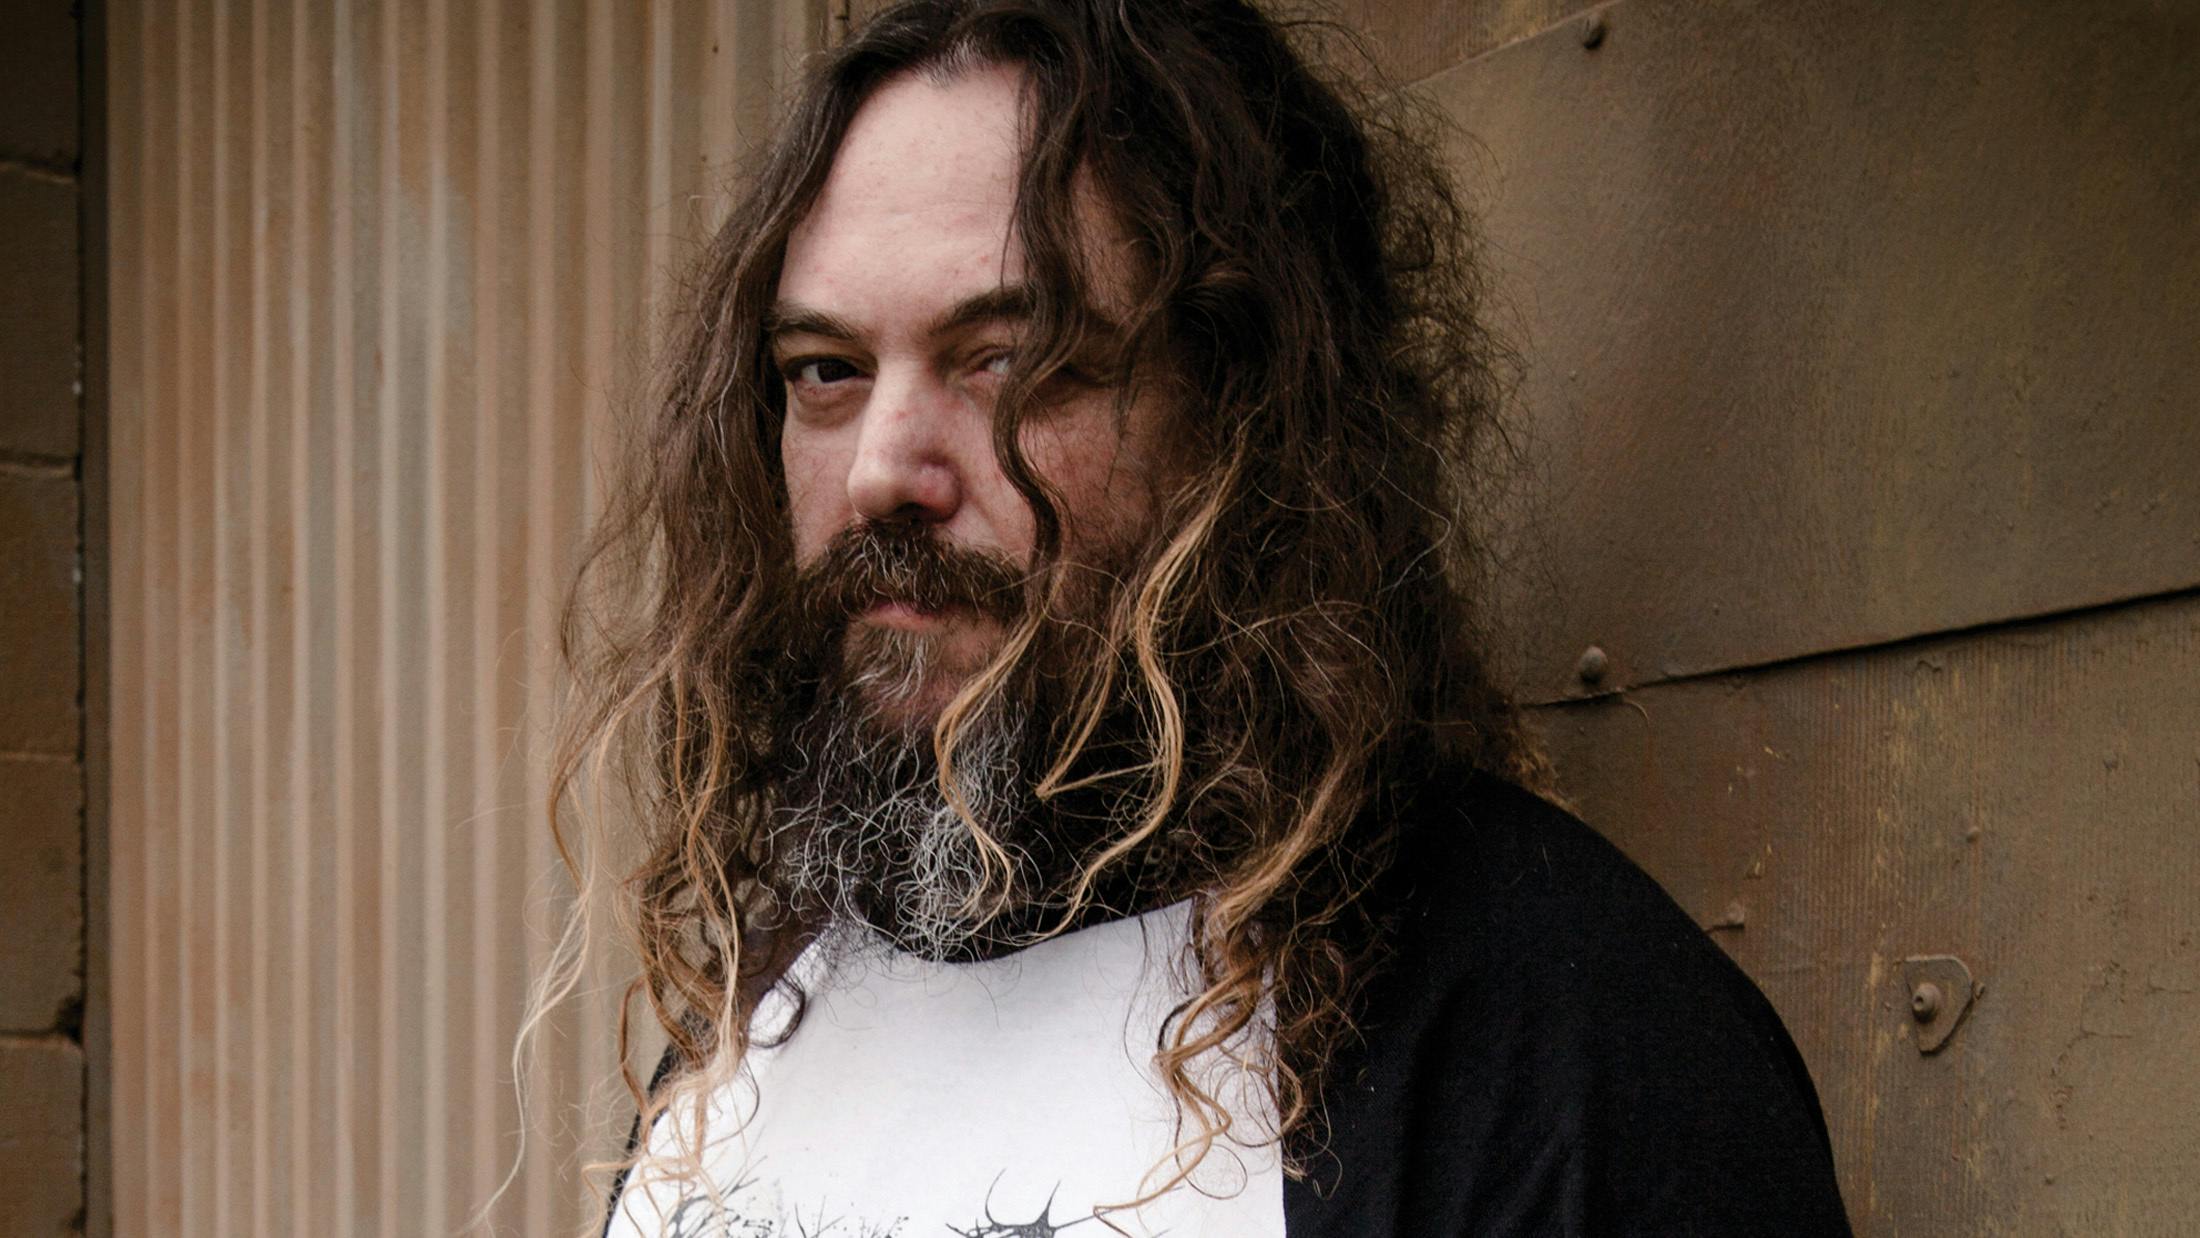 Max Cavalera: The 10 songs that changed my life